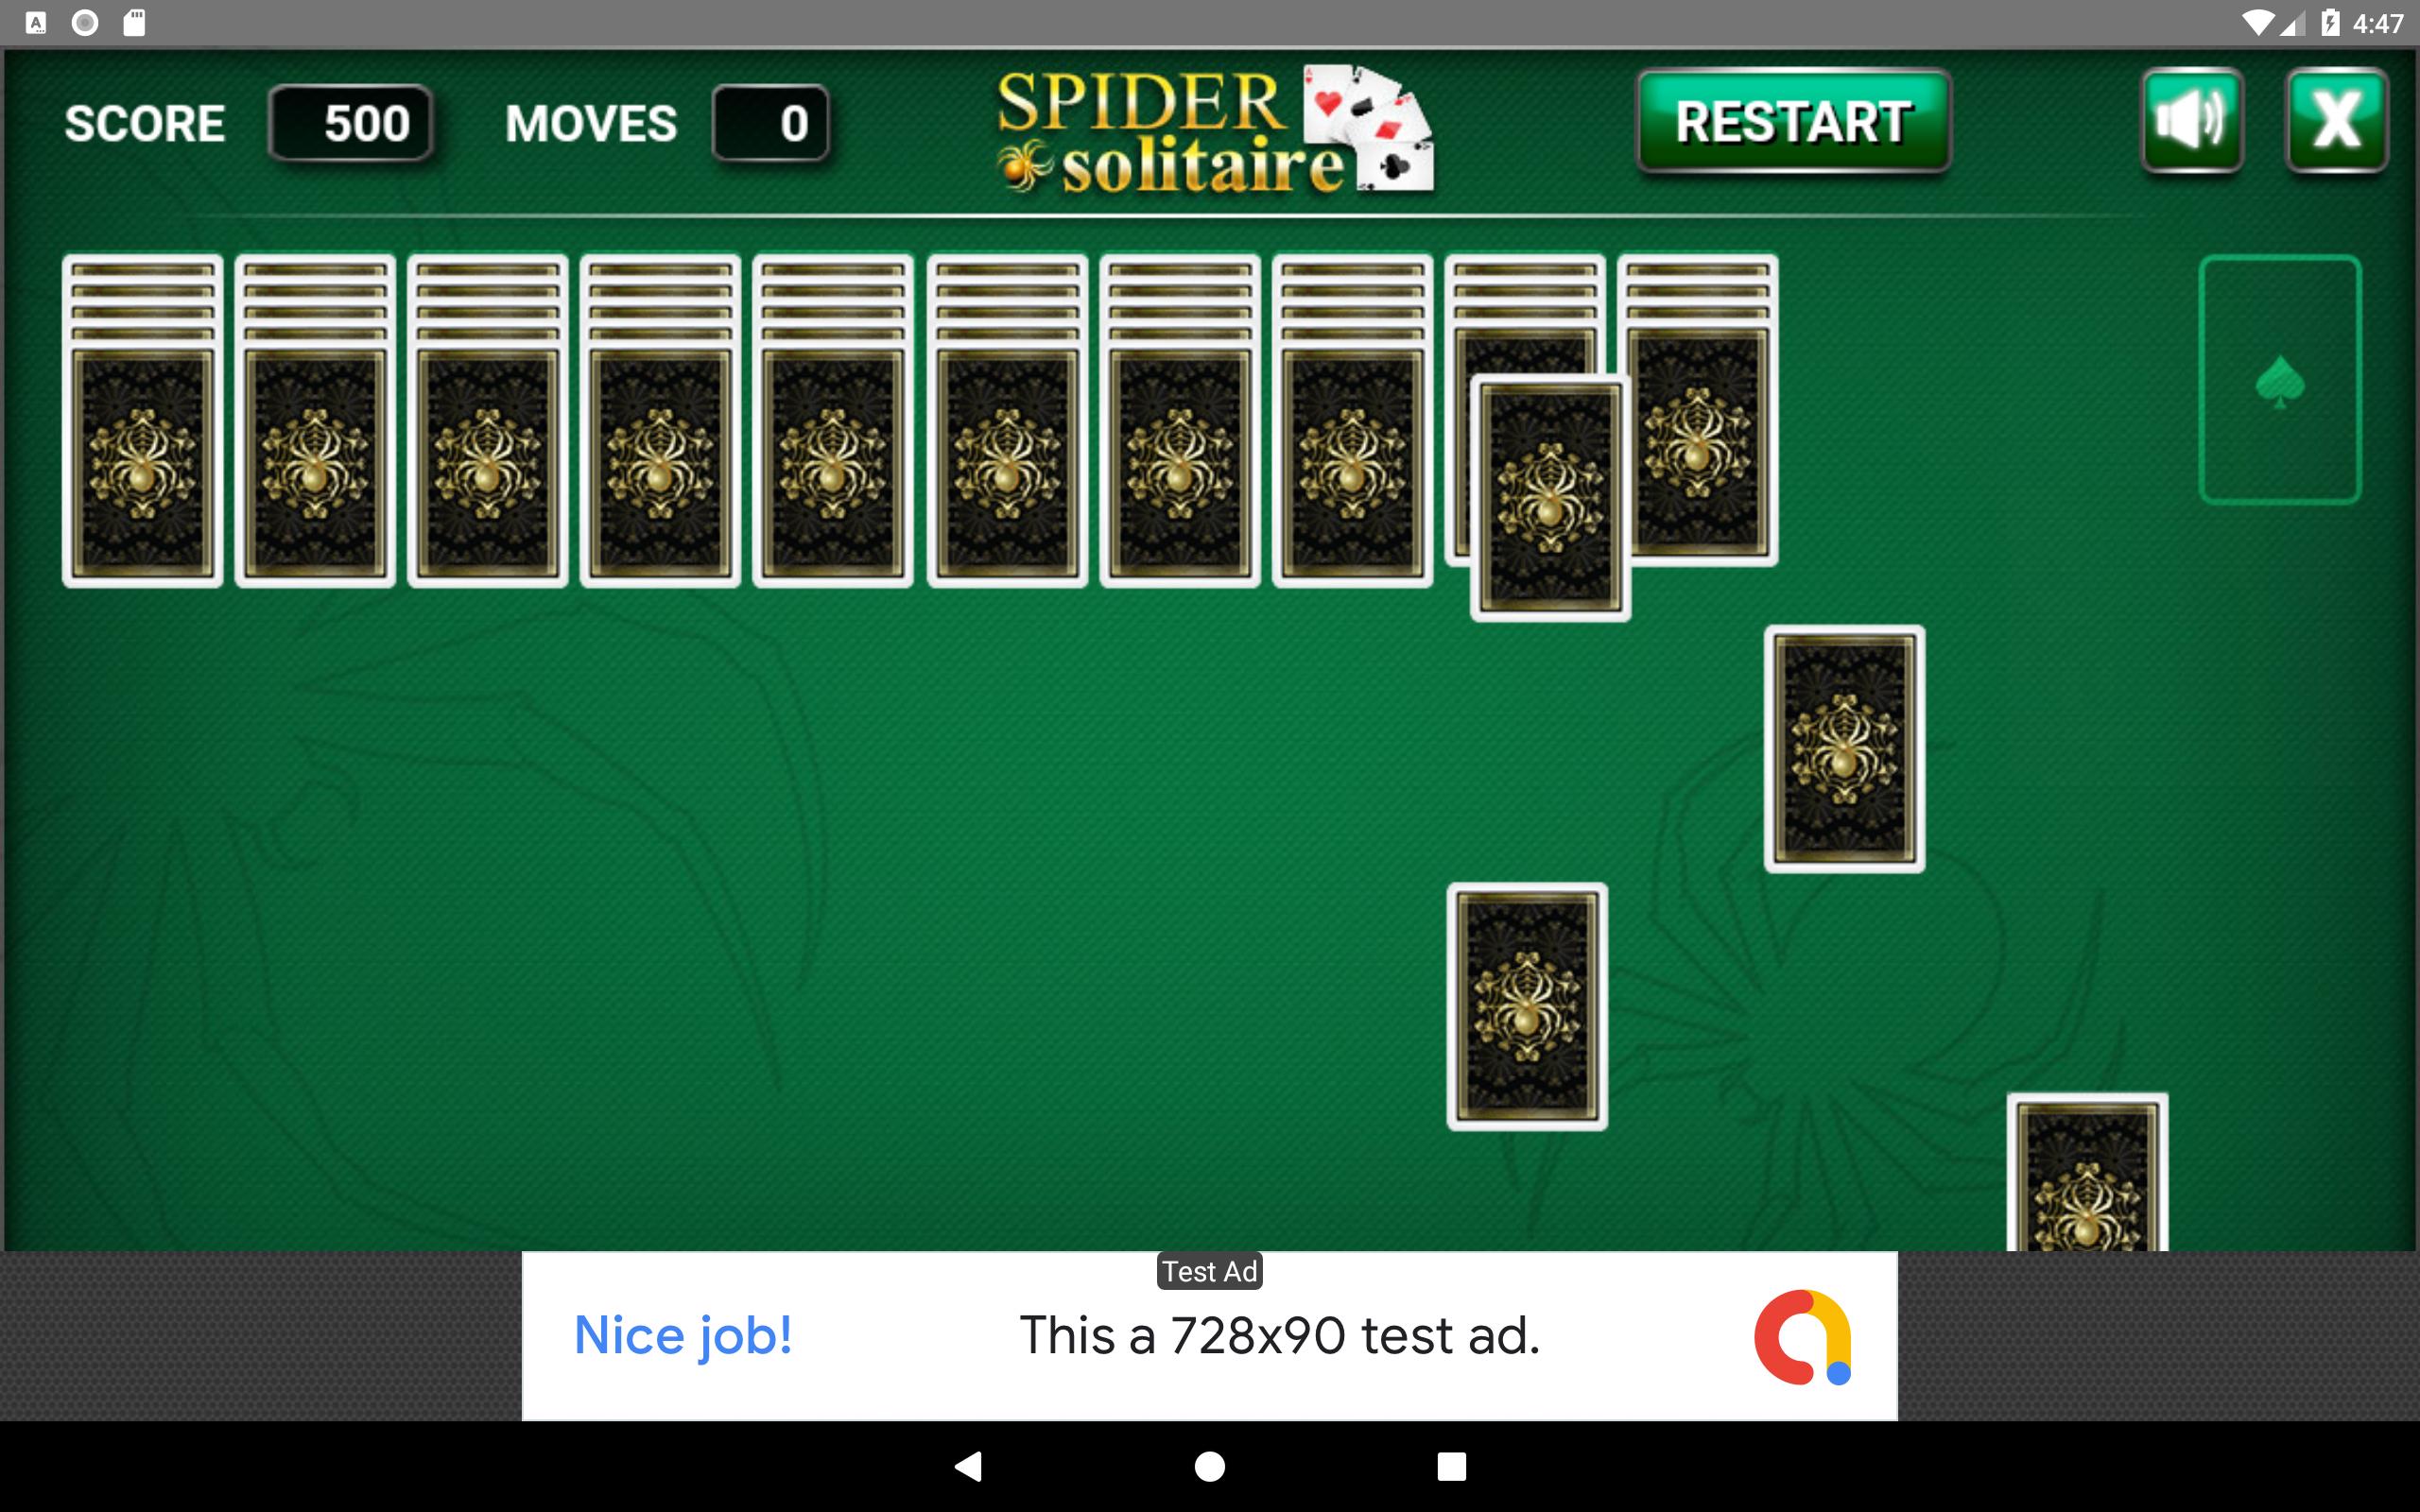 Spider Solitaire Classic 2018 For Android Apk Download - 13 best photos of 728x90 banner ad 728x90 roblox ad banner